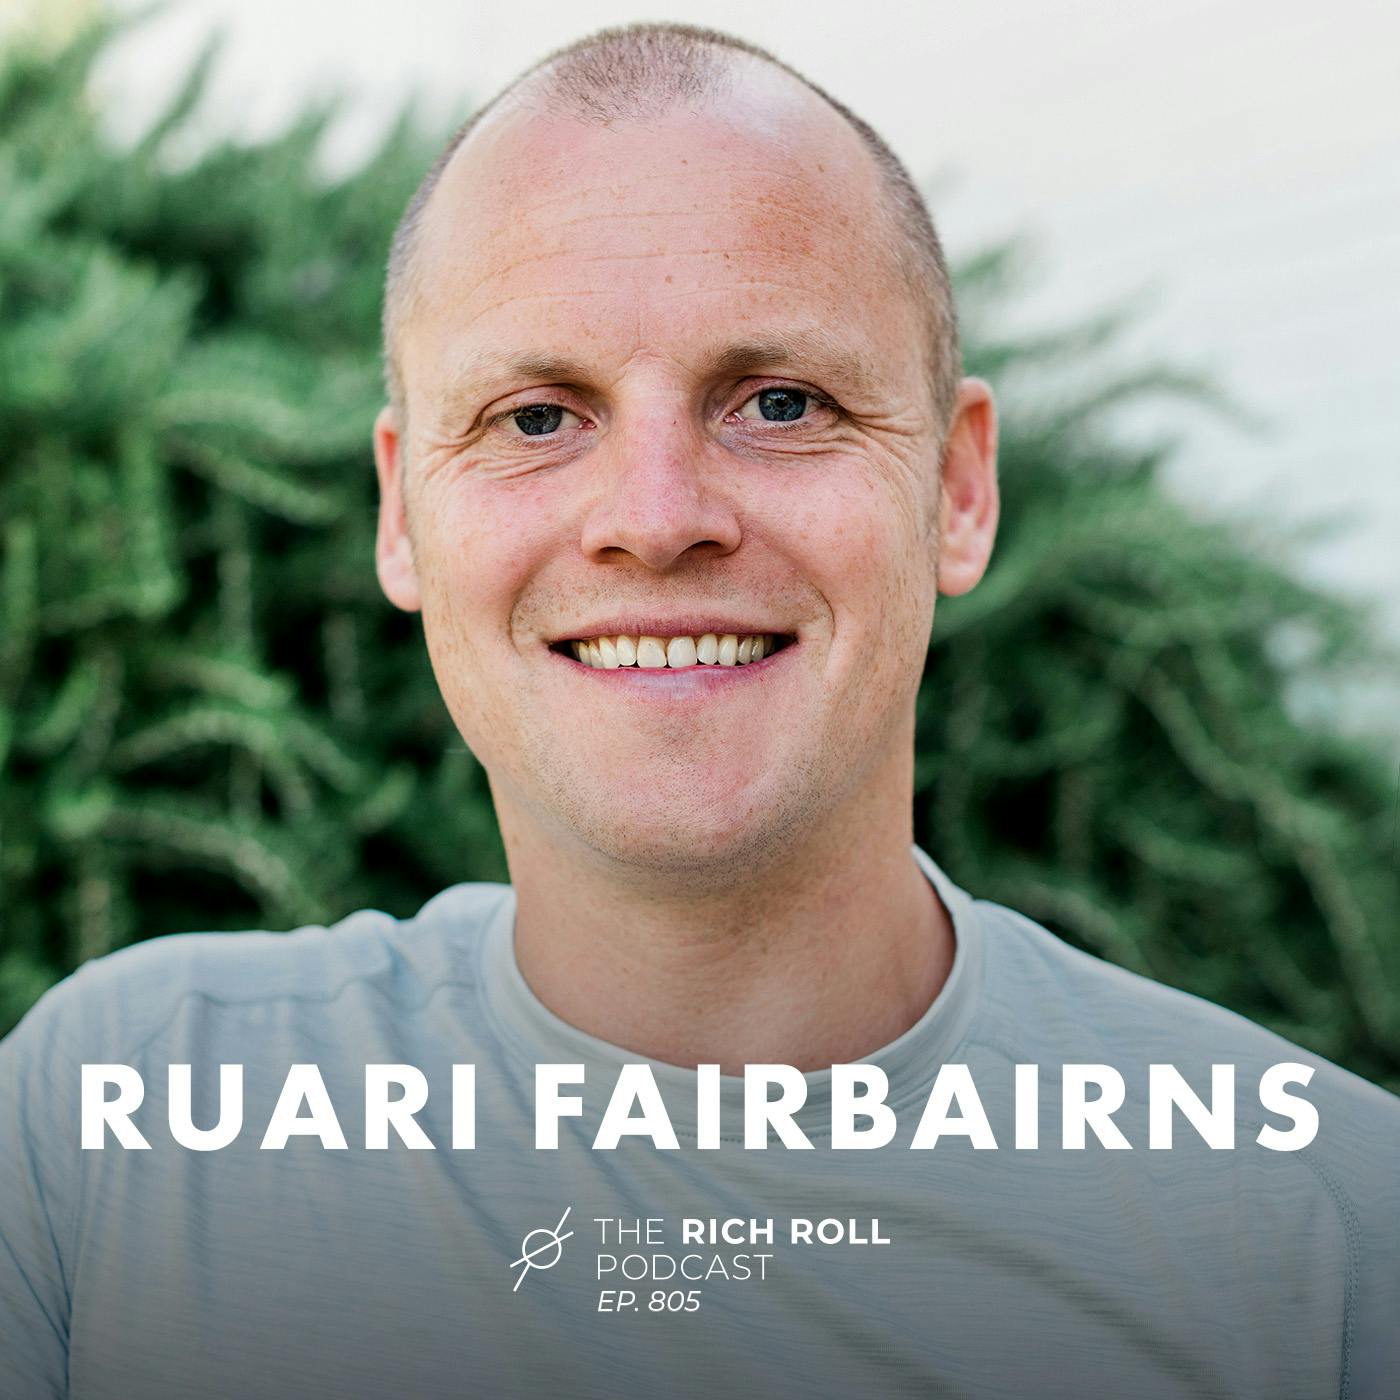 The Limitless Power of An Alcohol-Free Lifestyle With One Year No Beer Co-Founder Ruari Fairbairns